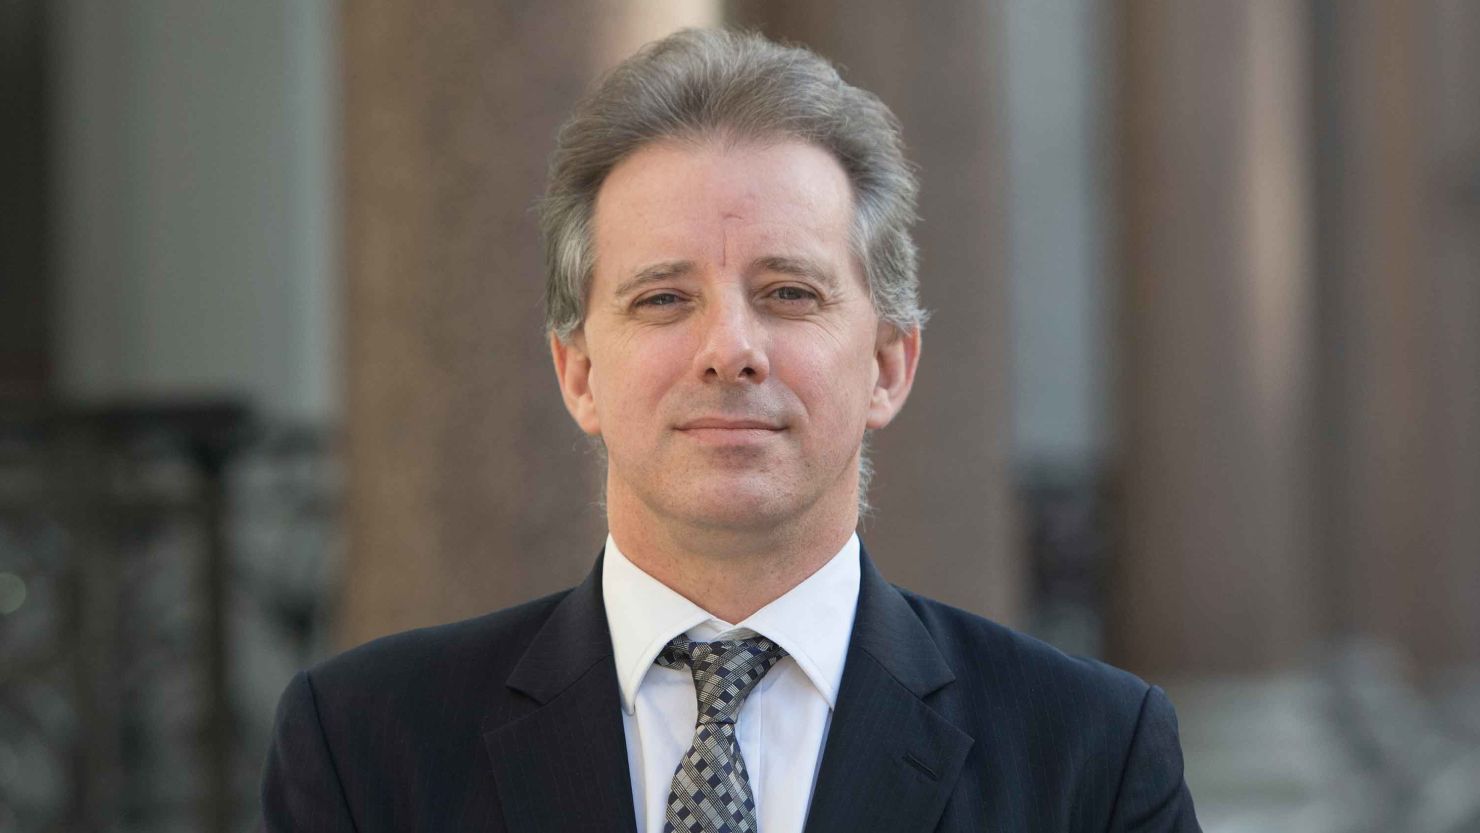 Trump dossier author Christopher Steele has returned to work in London.